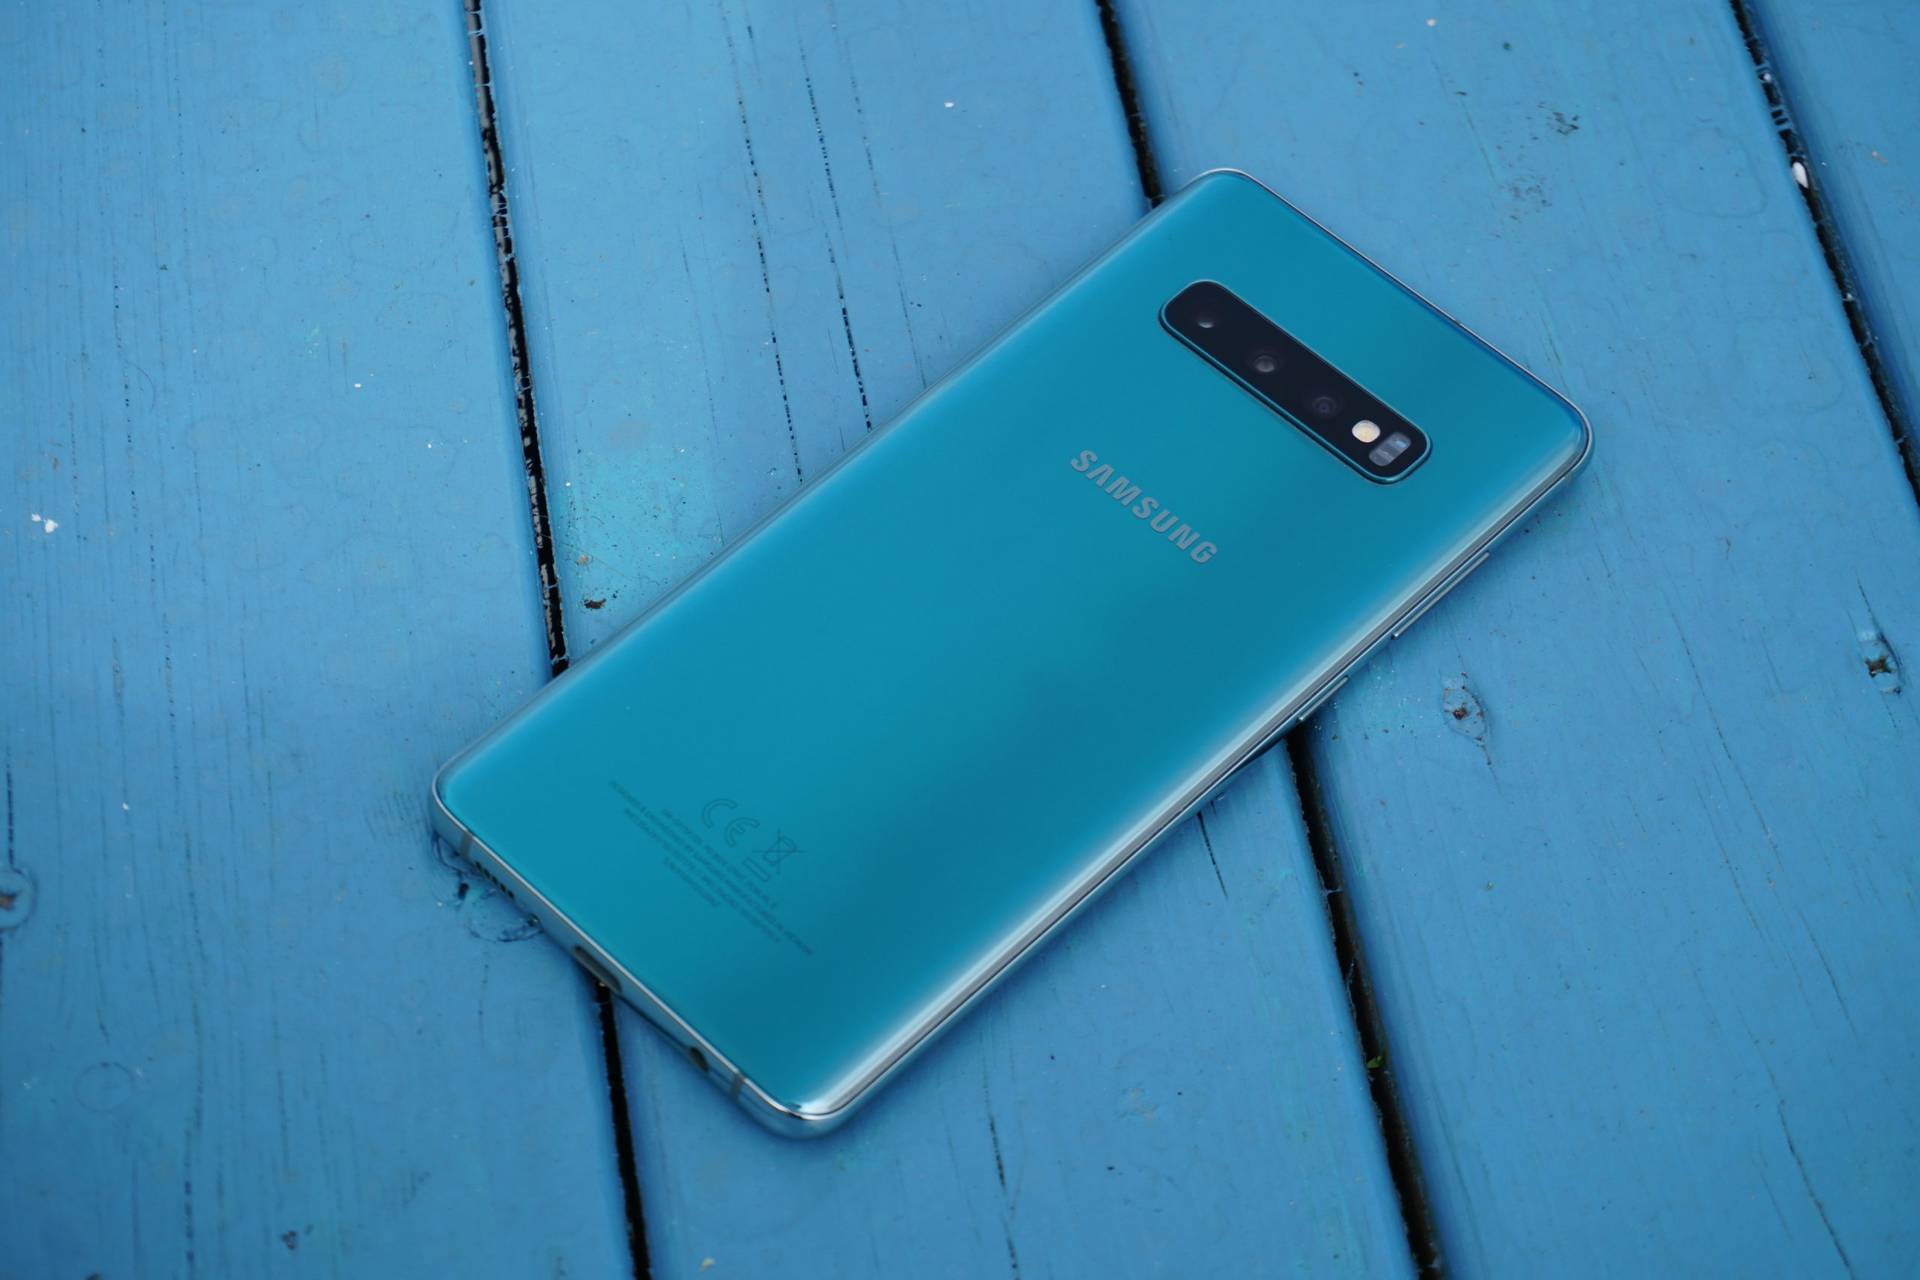 The Samsung Galaxy S10 5G will receive less frequent security updates going forward